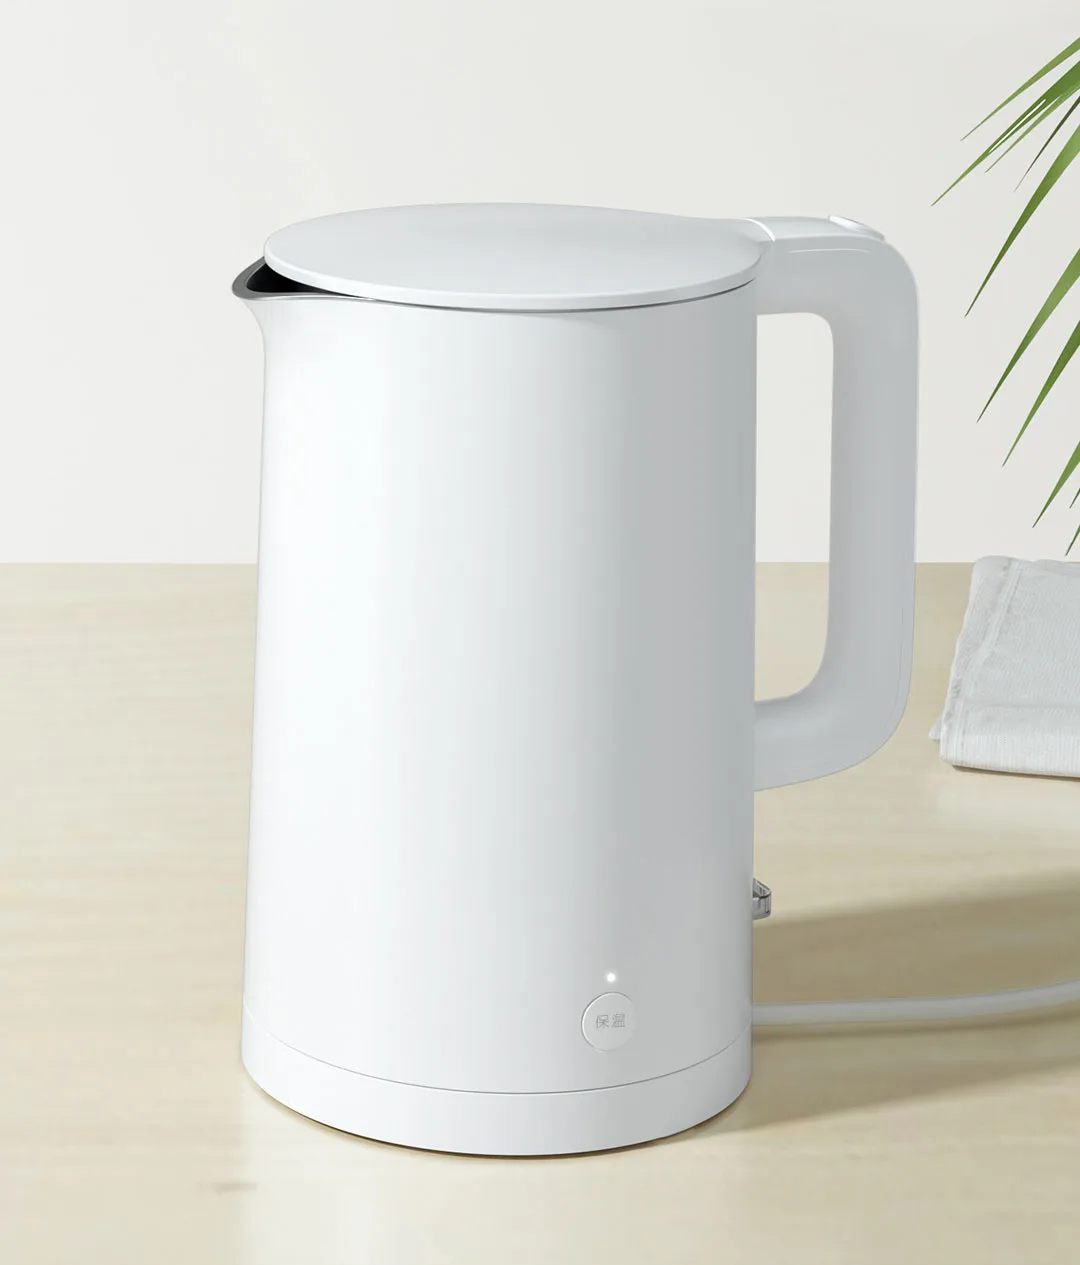 XIAOMI MIJIA Constant Temperature Electric Kettles P1 Quiet Edition 47dB(A)  1800W LED Display Four Thermos Modes Water Teapots - AliExpress